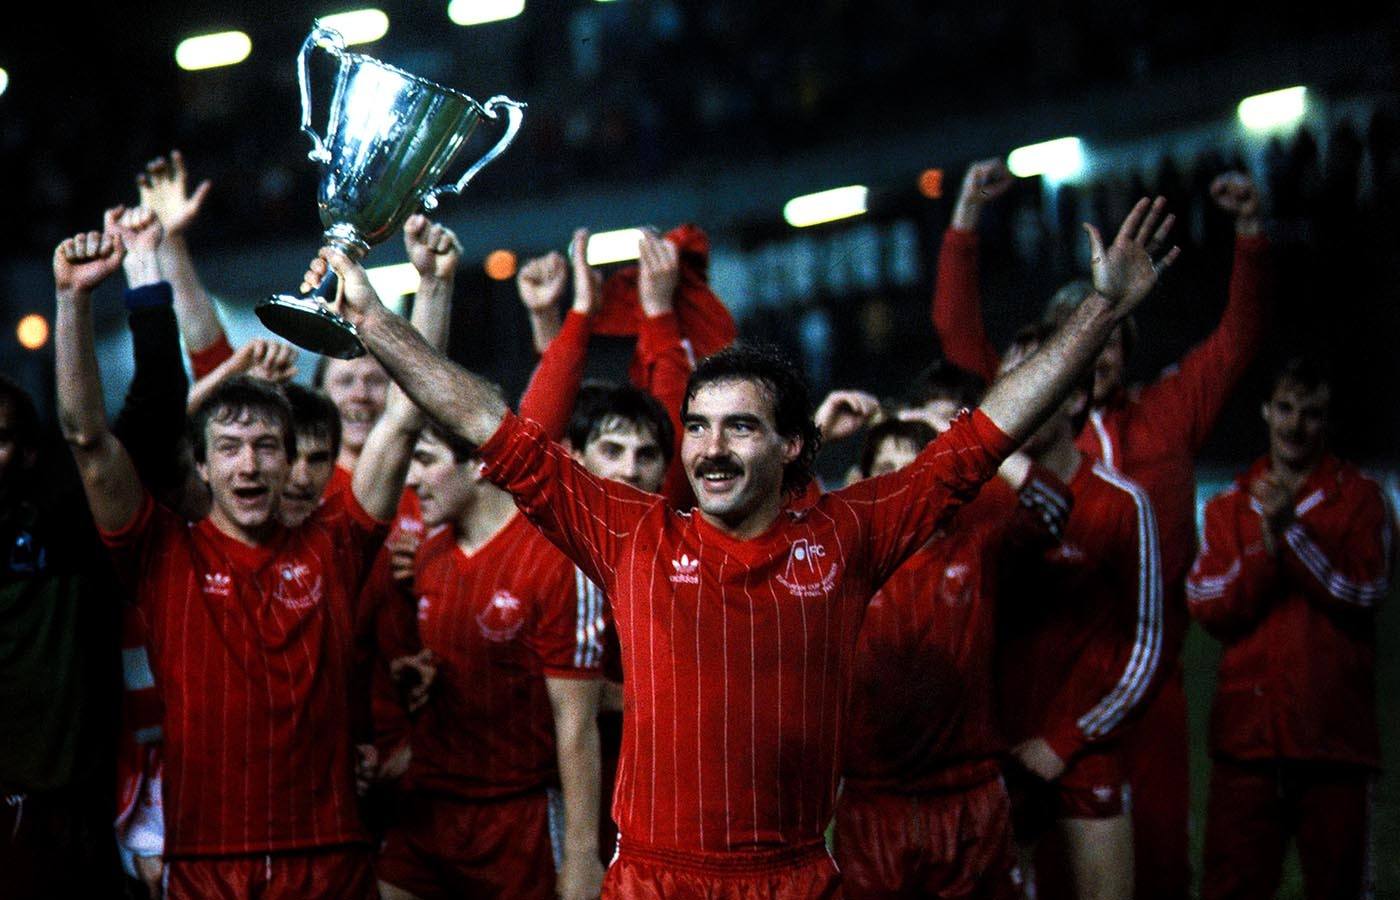 Aberdeen captain Willie Miller holds aloft the Cup winners Cup in 1983.